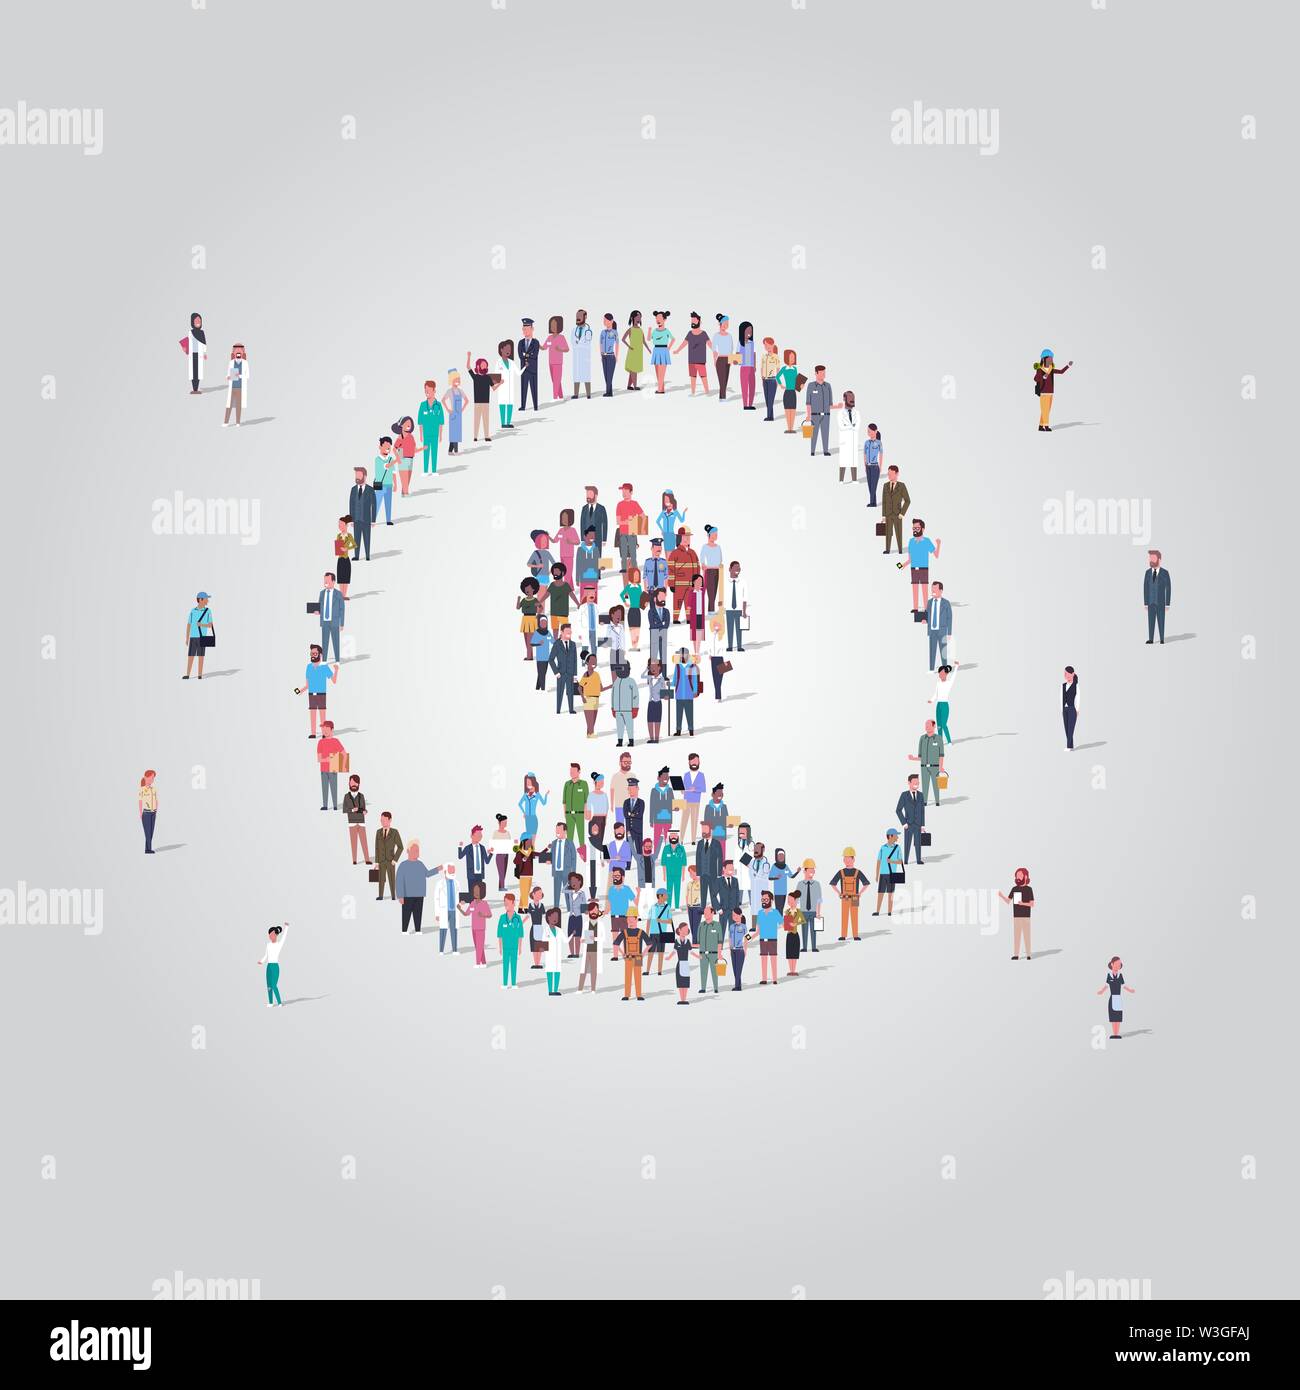 people crowd gathering in user avatar shape social media communication profile concept different occupation employees group standing together full Stock Vector